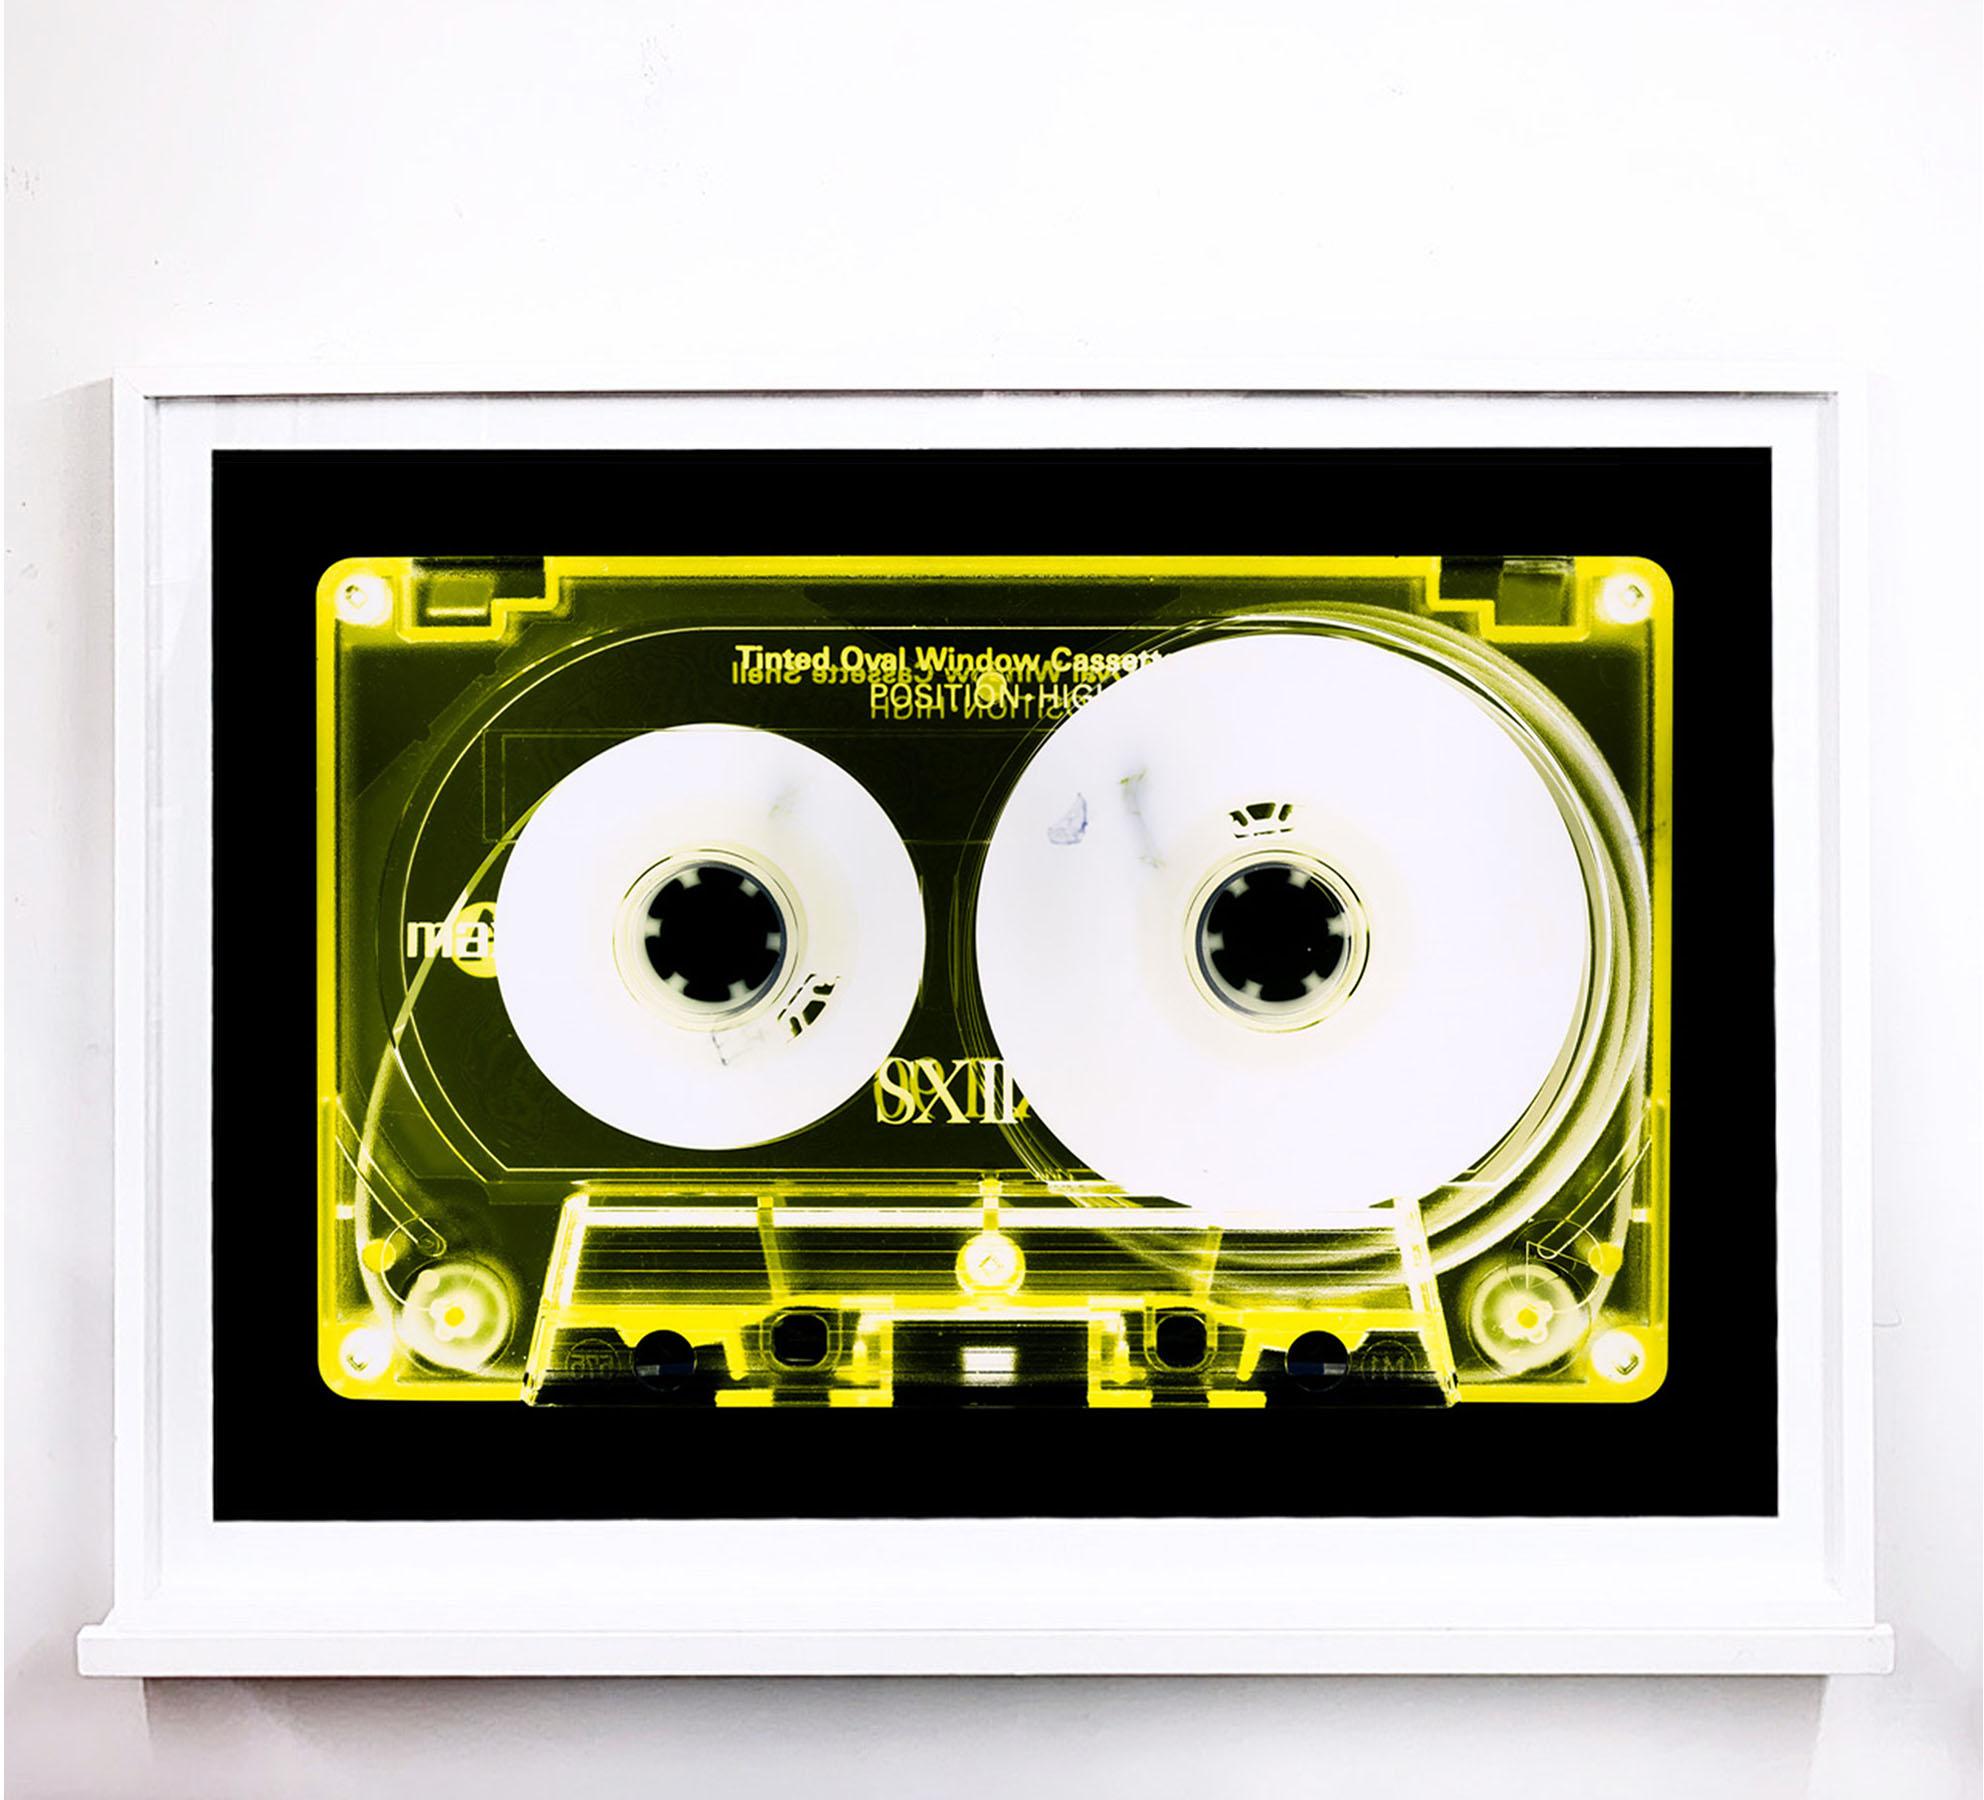 Tape Collection, Yellow Tinted Cassette - Contemporary Pop Art Color Photography - Black Still-Life Photograph by Heidler & Heeps